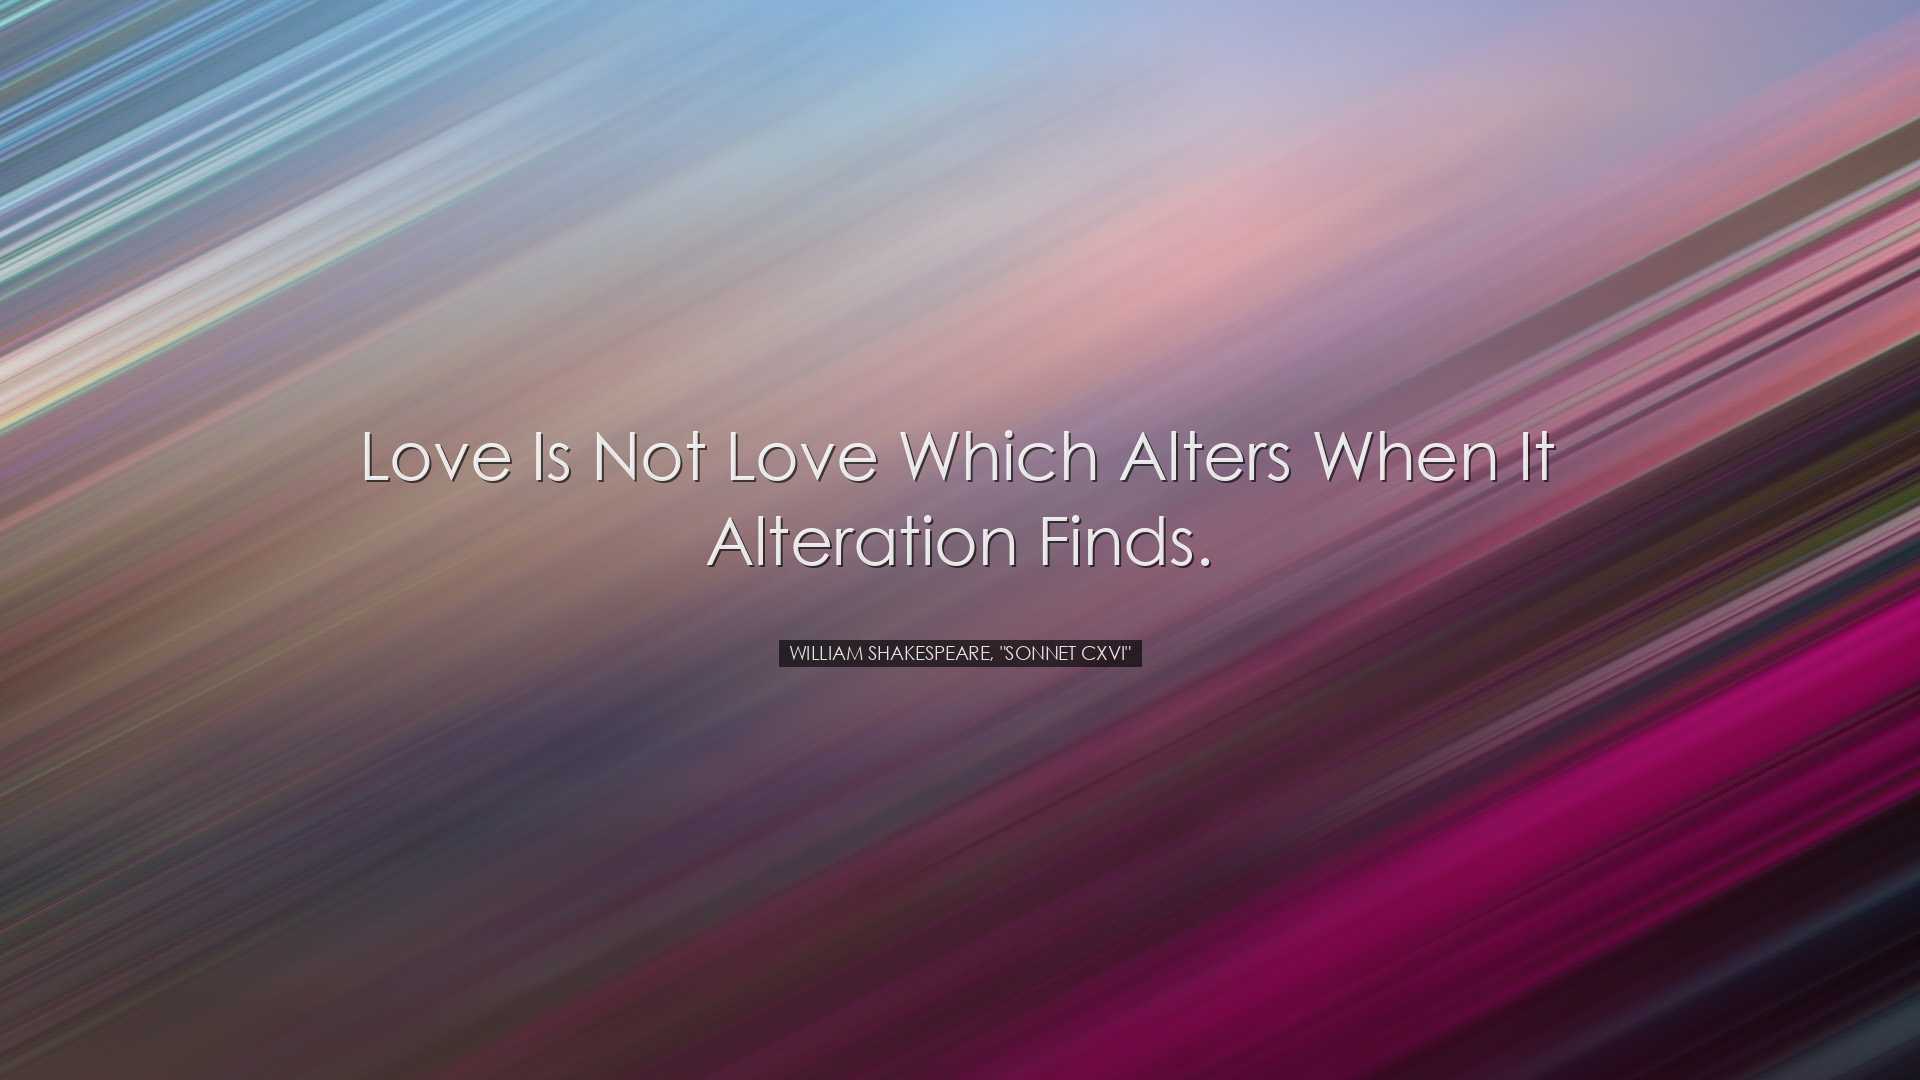 Love is not love which alters when it alteration finds. - William